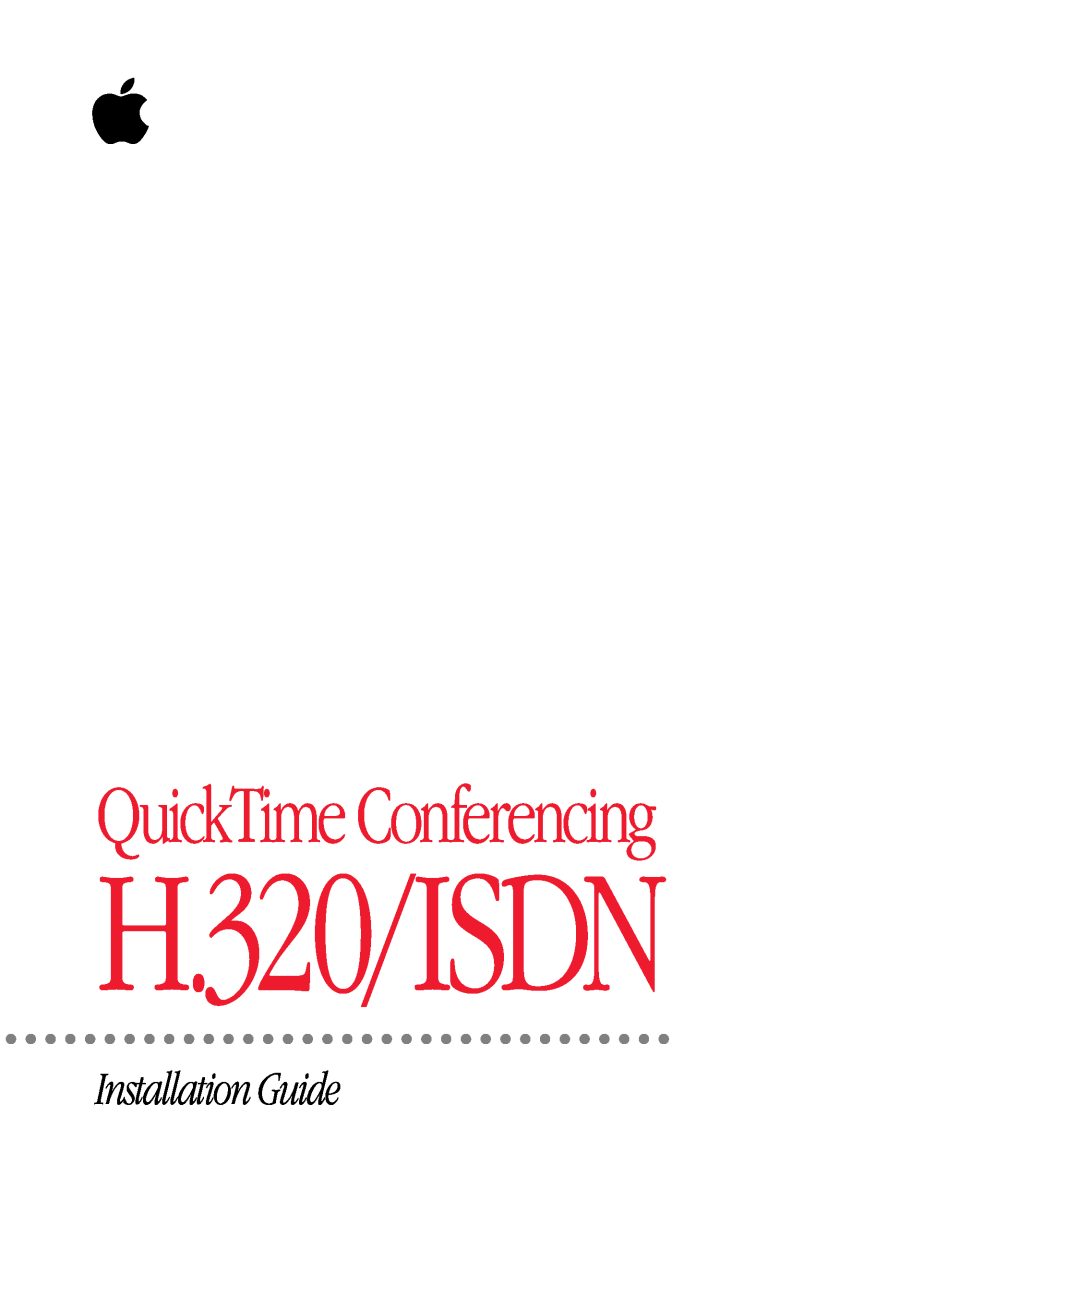 Apple quicktimeconferencing manual H.320/ISDN, QuickTime Conferencing, Installation Guide 